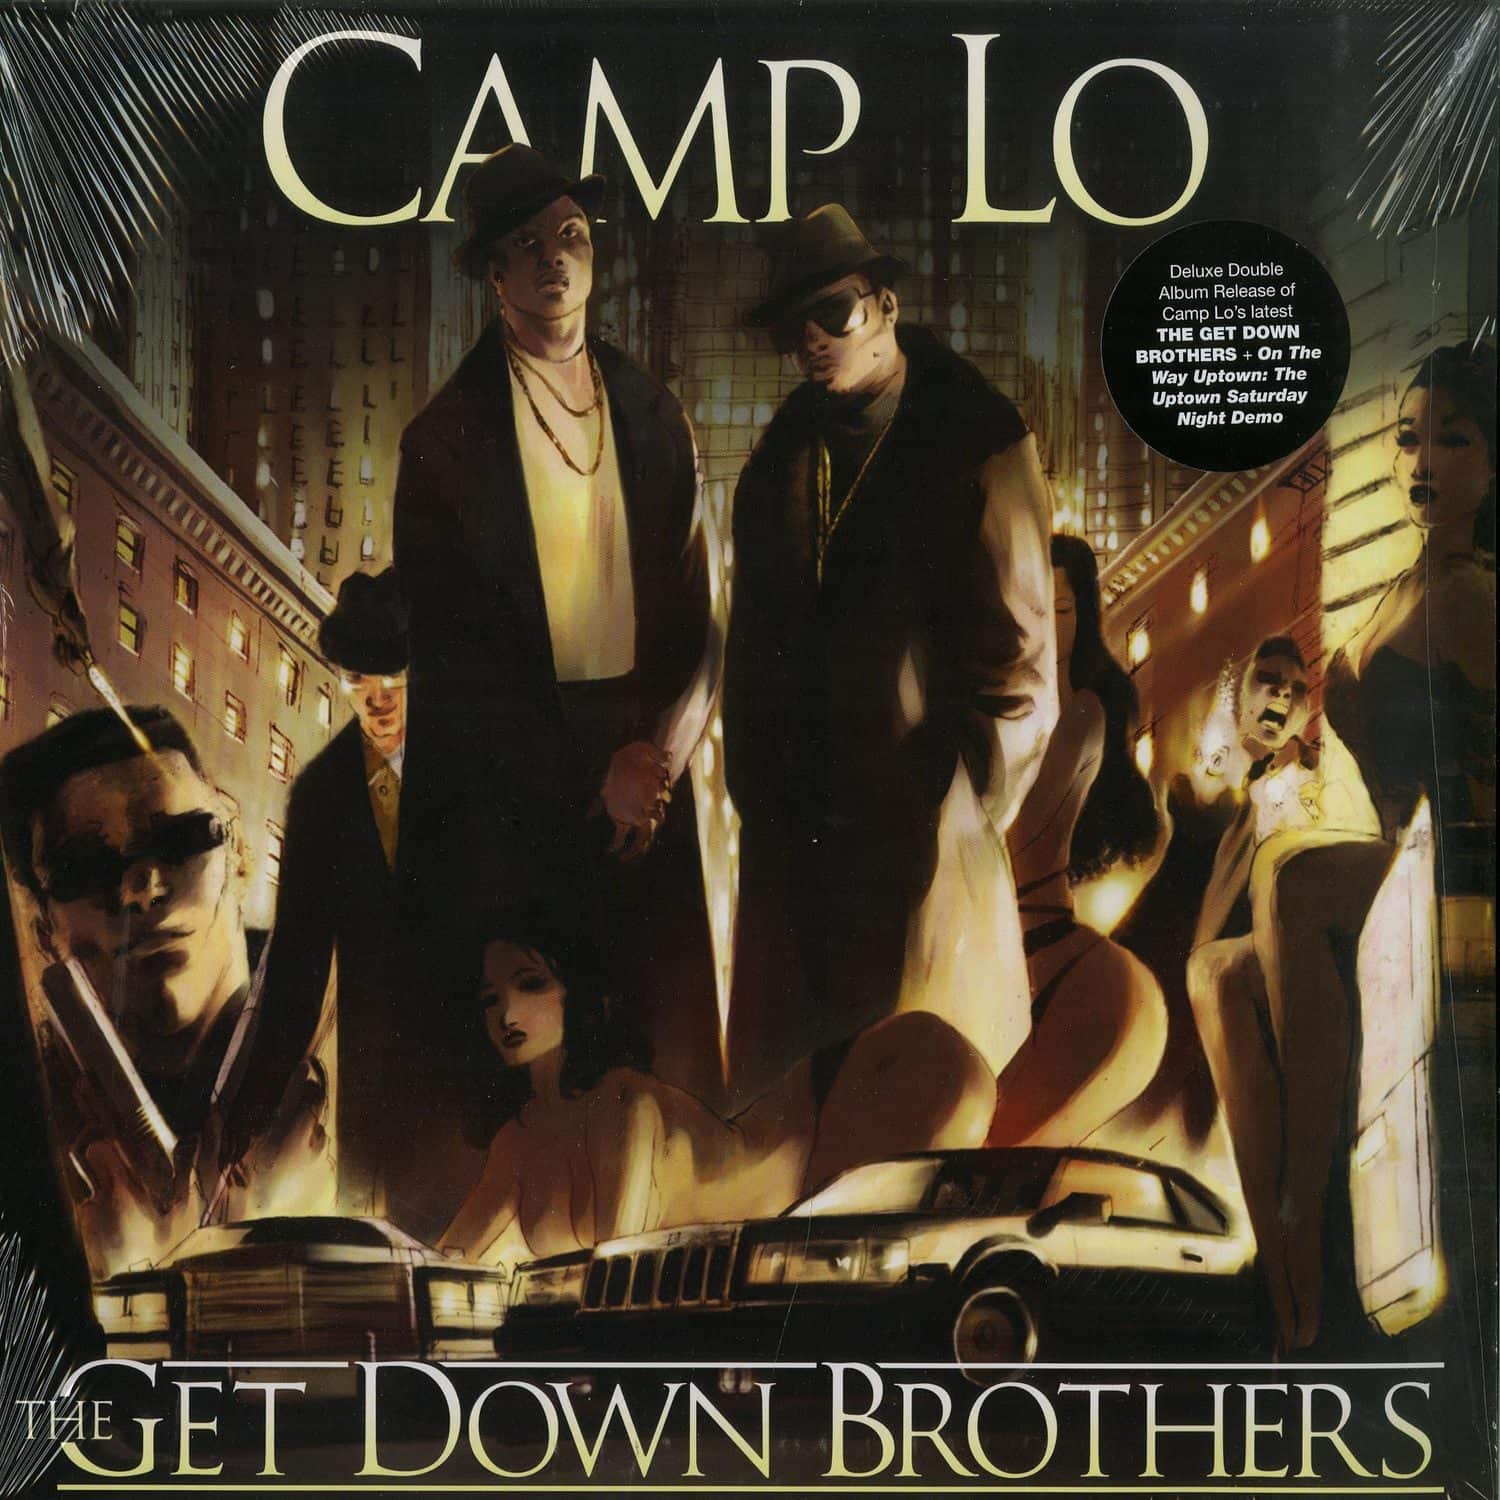 Camp Lo - THE GET DOWN BROTHERS / ON THE WAY UPTOWN 